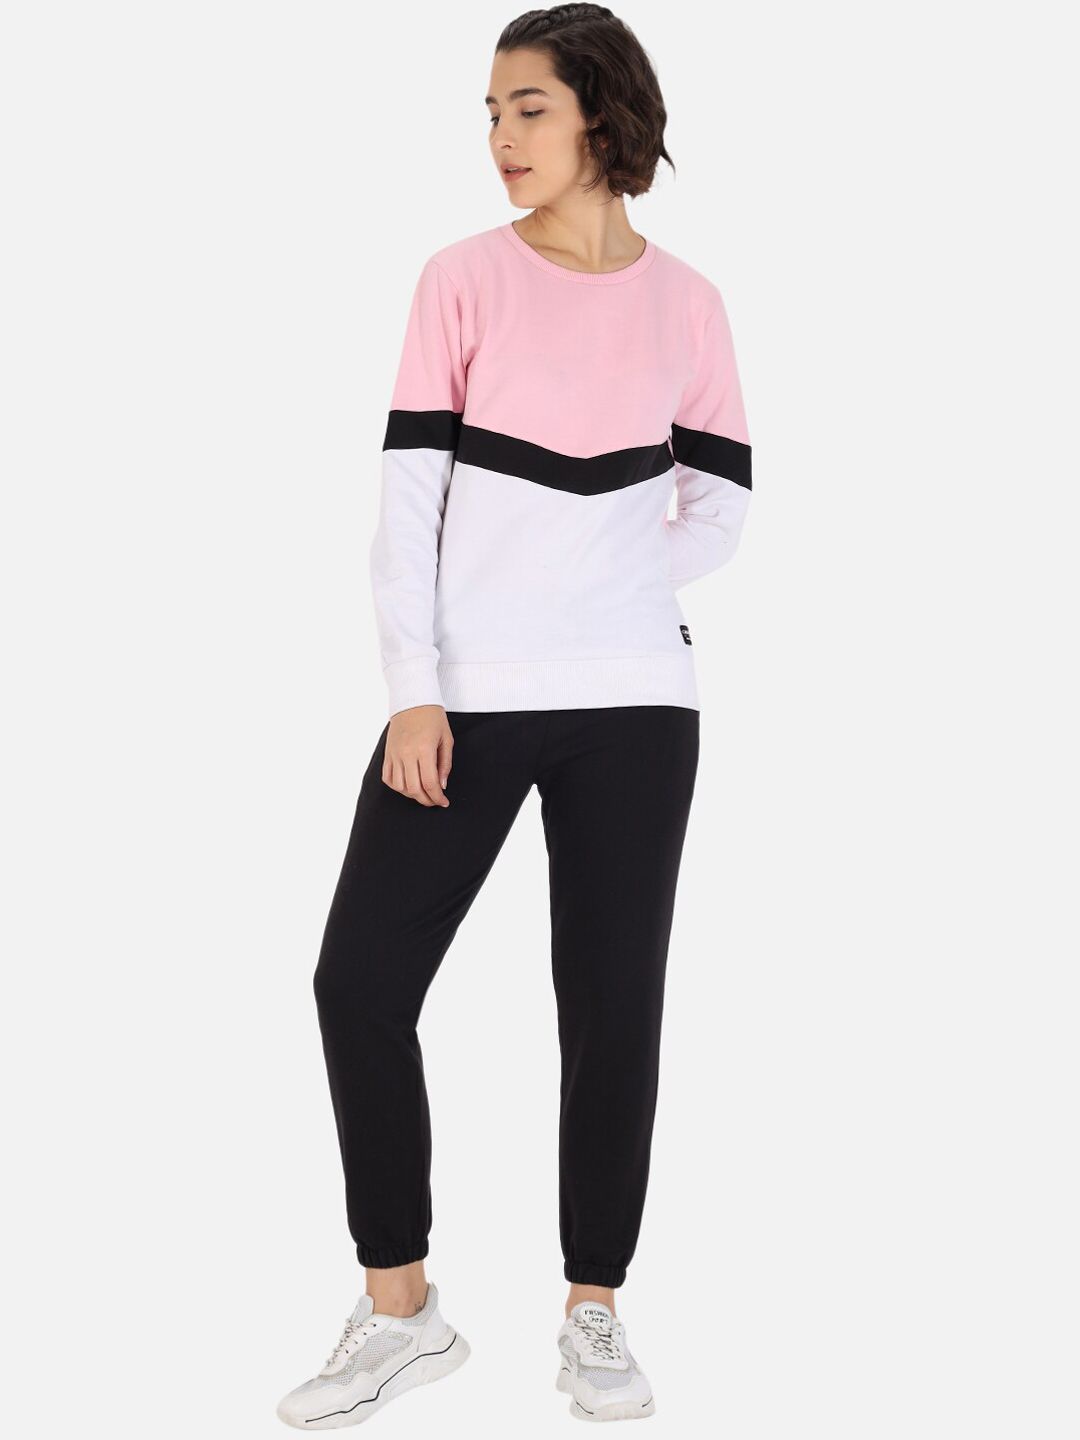 GRIFFEL Women Pink & White Colourblocked Tracksuit Price in India